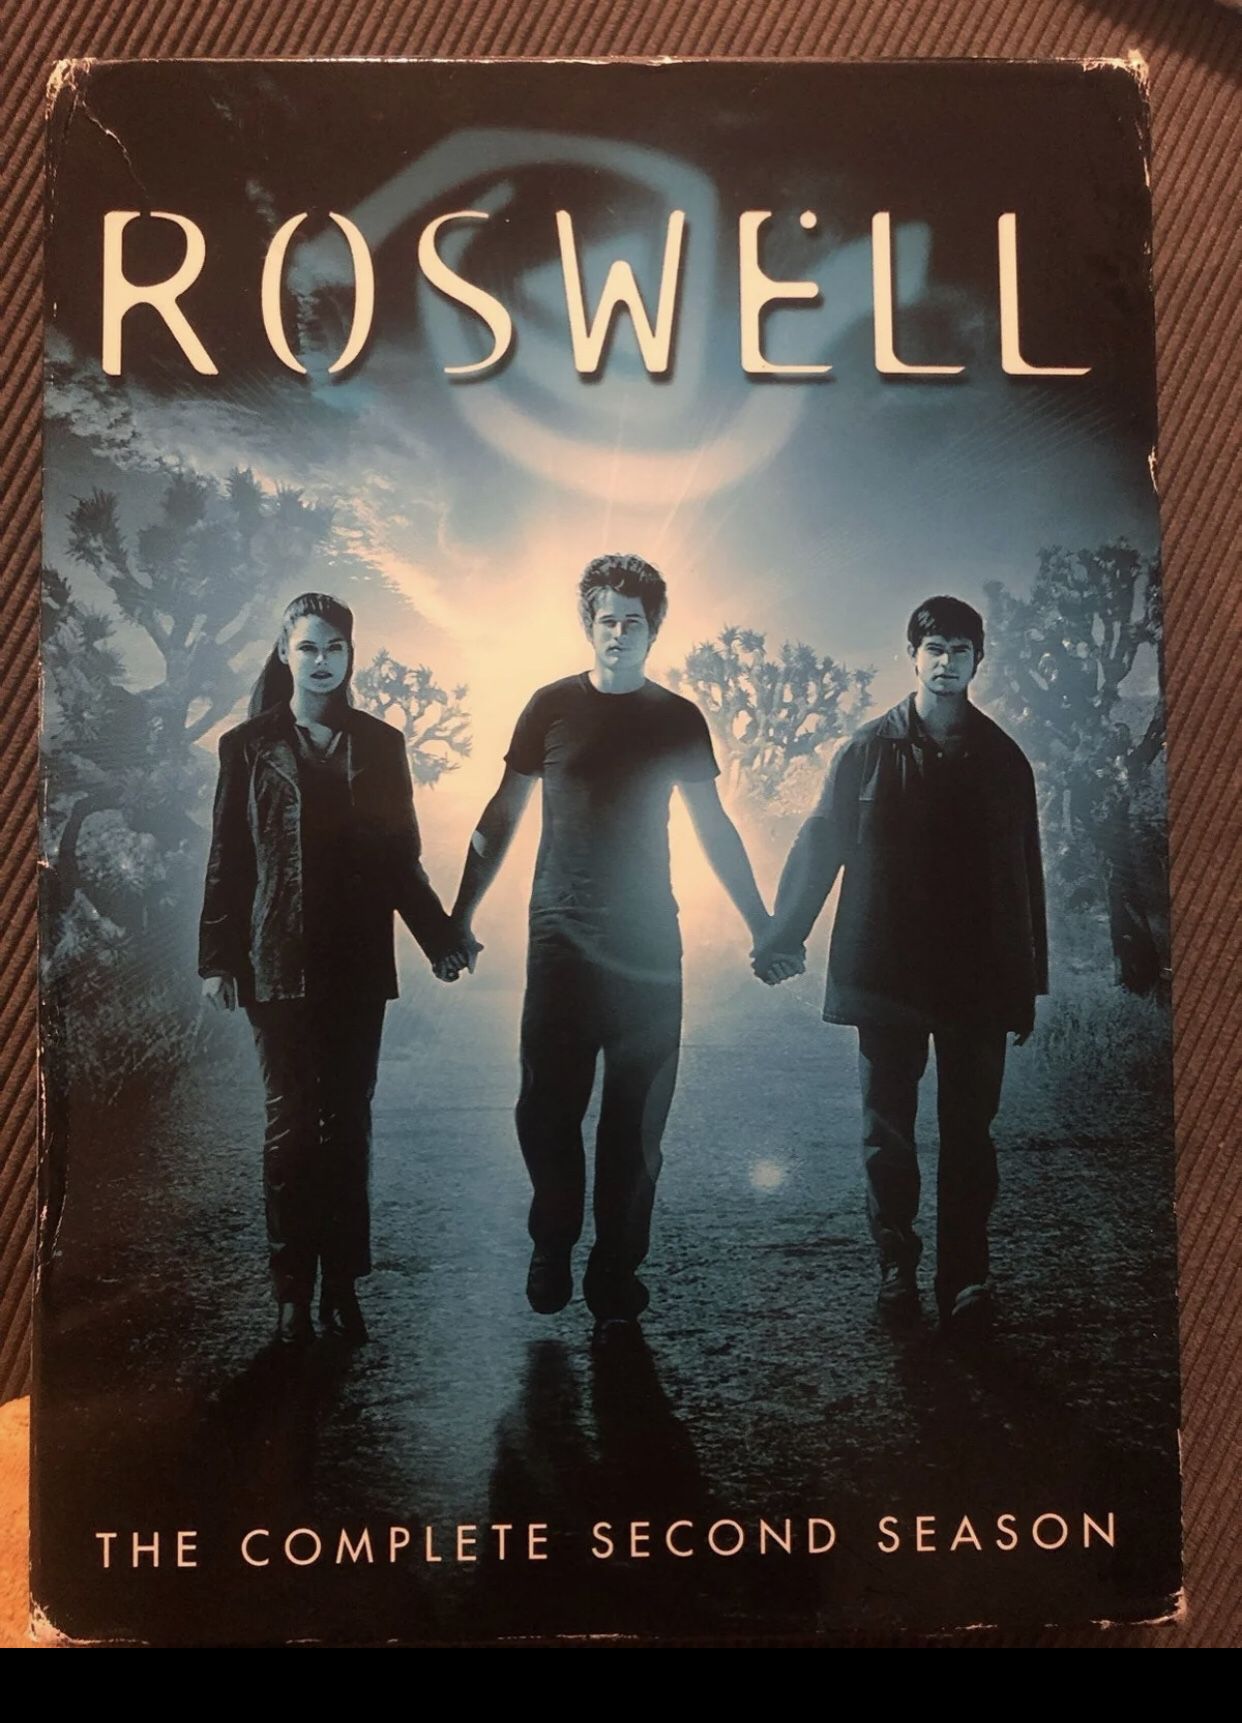 DVD- ROSWELL- season 2 complete